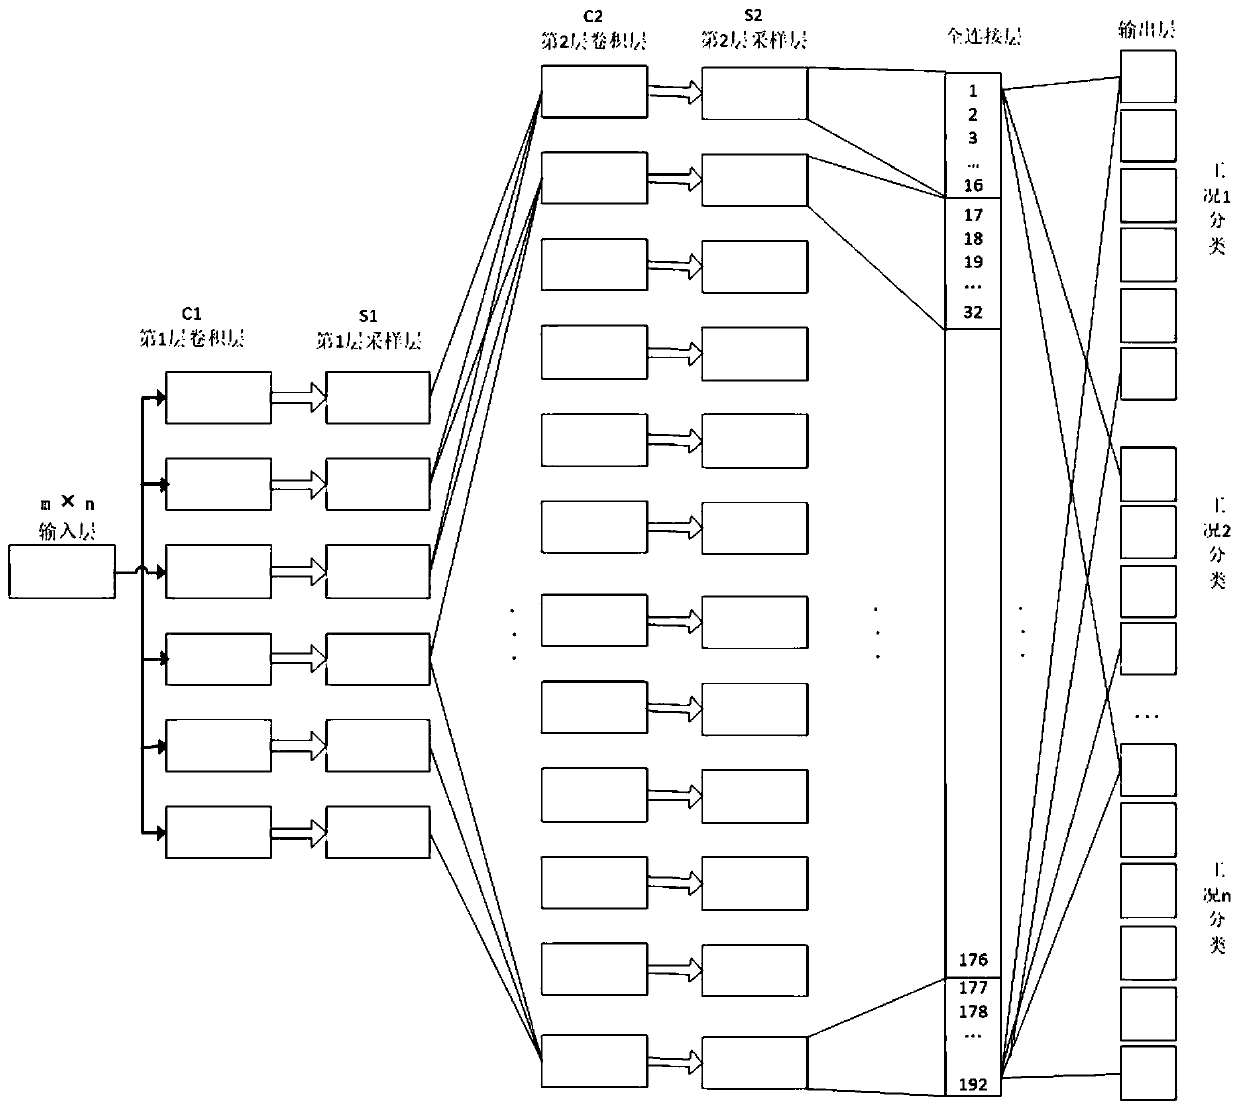 An aircraft system fault diagnosis method based on mscnn deep learning